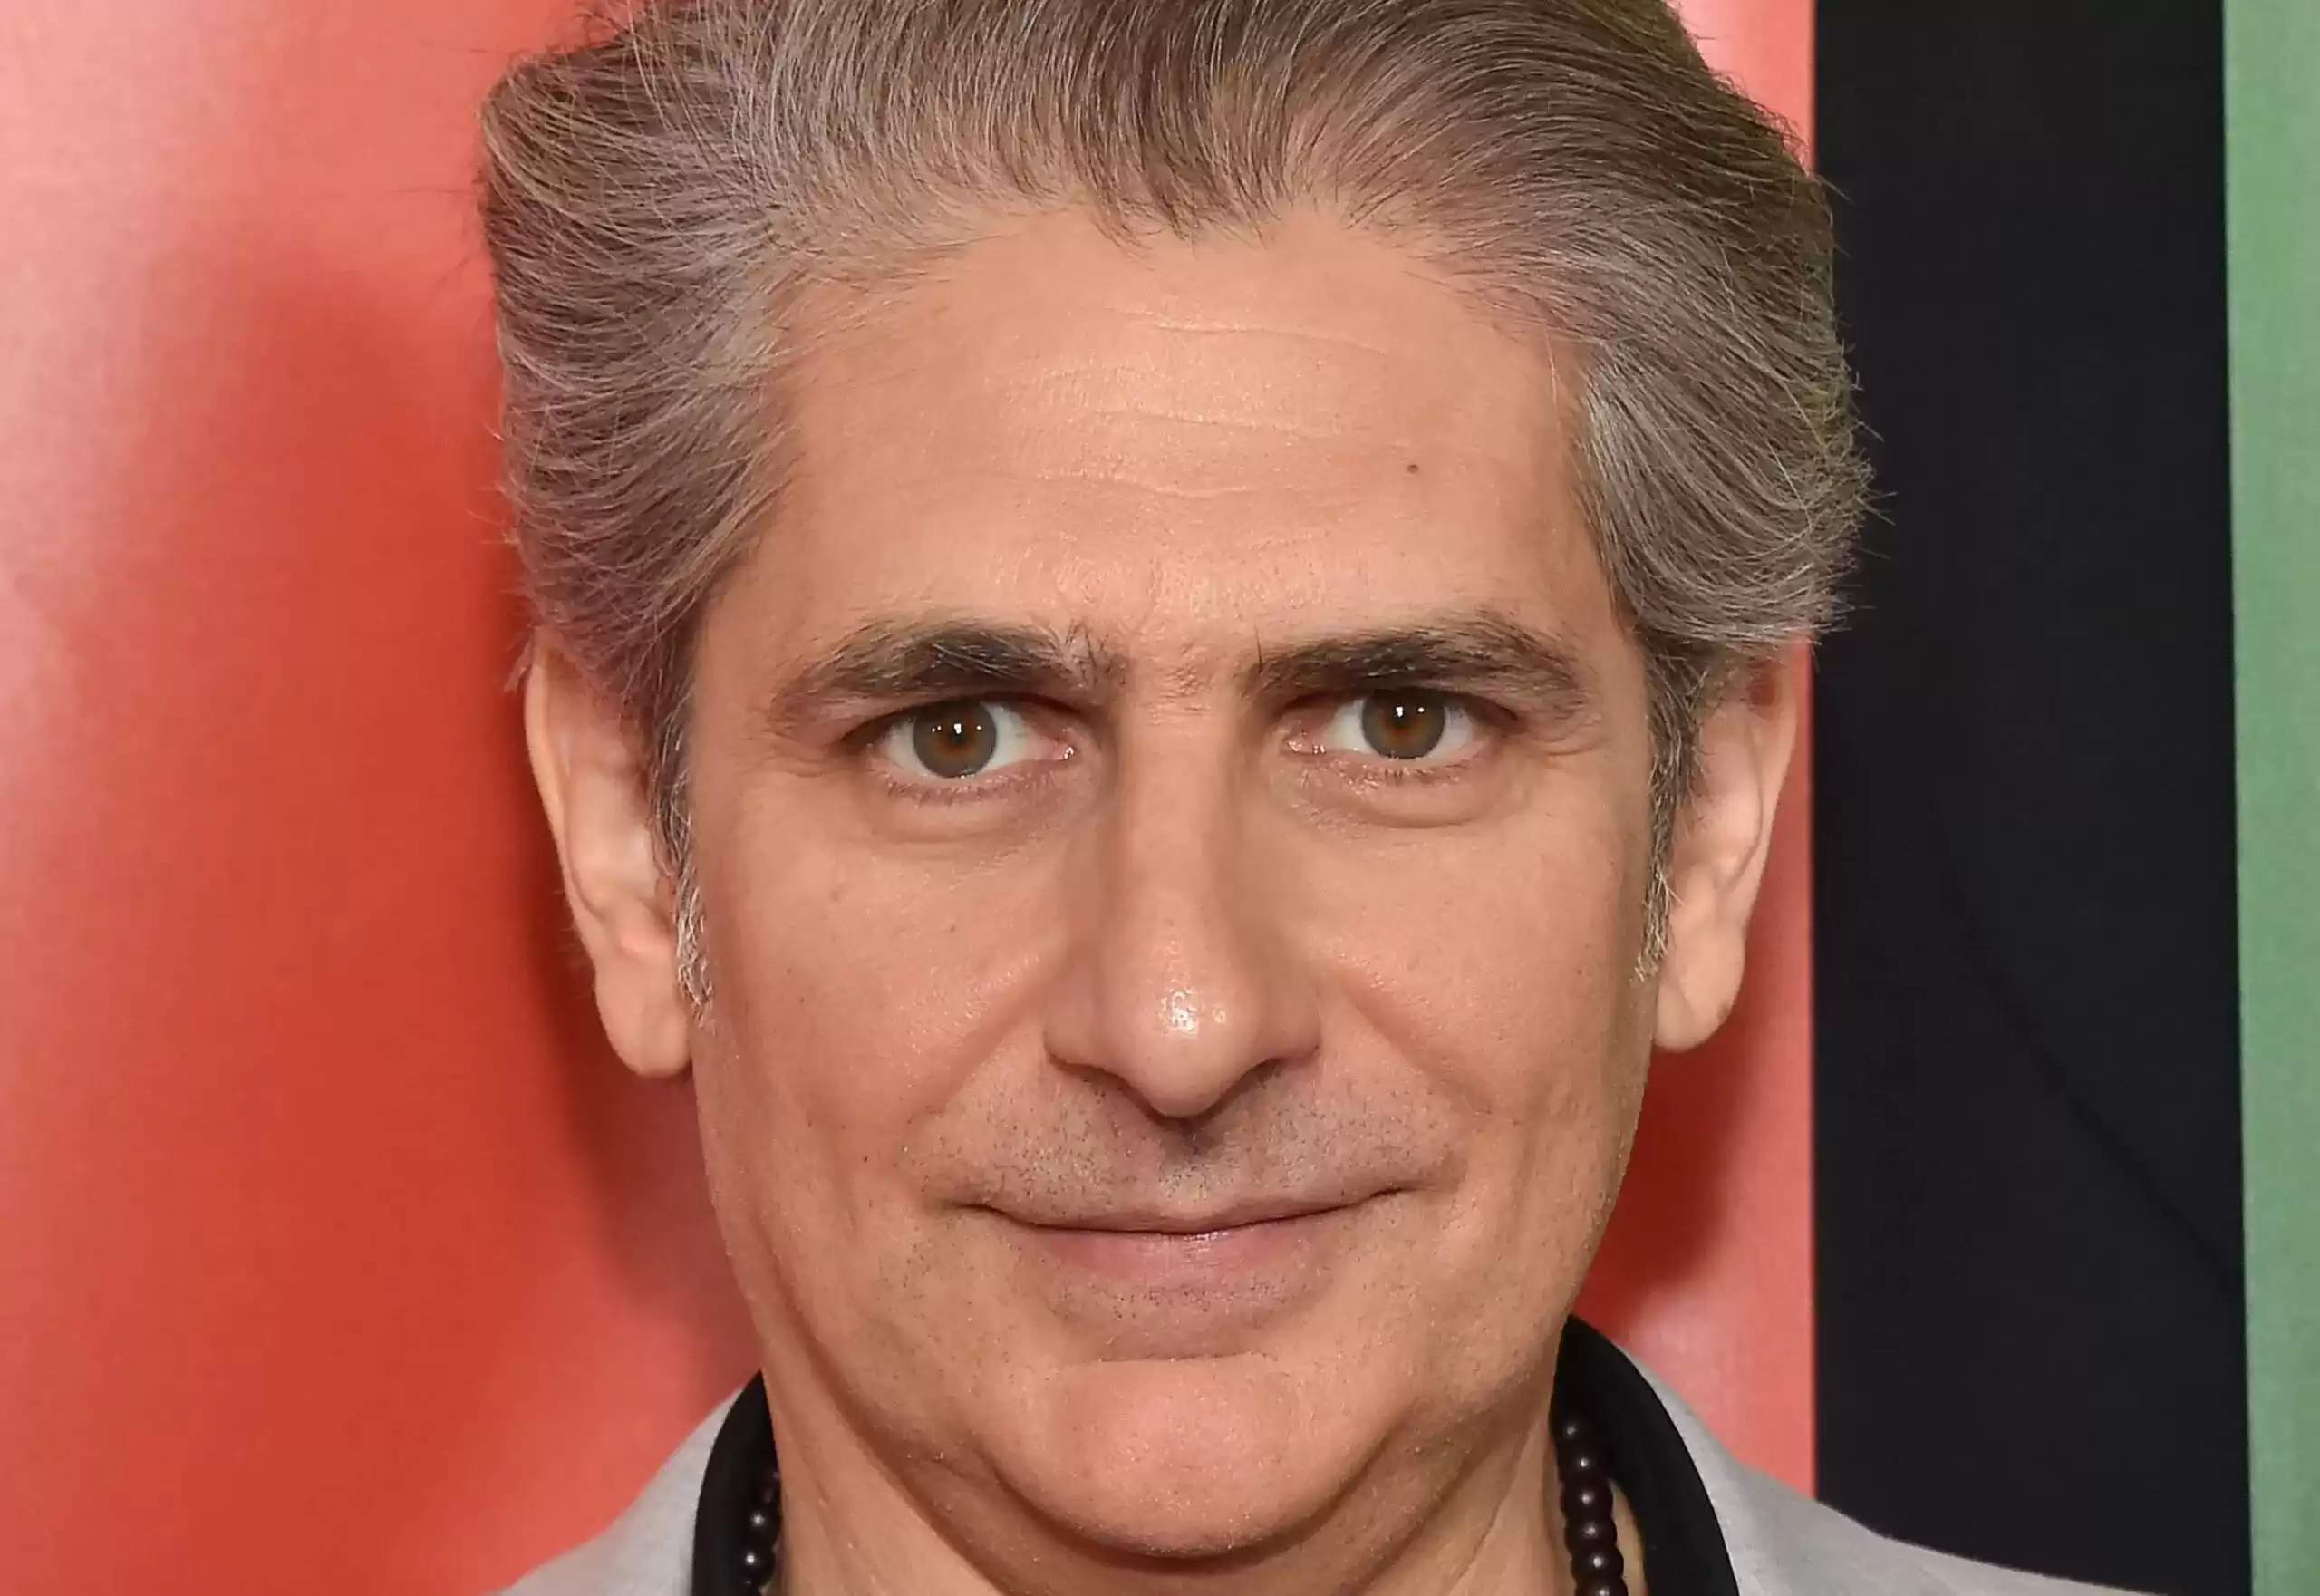 Michael Imperioli from The Sopranos takes a stand against LGBTQ discrimination following the SCOTUS ruling